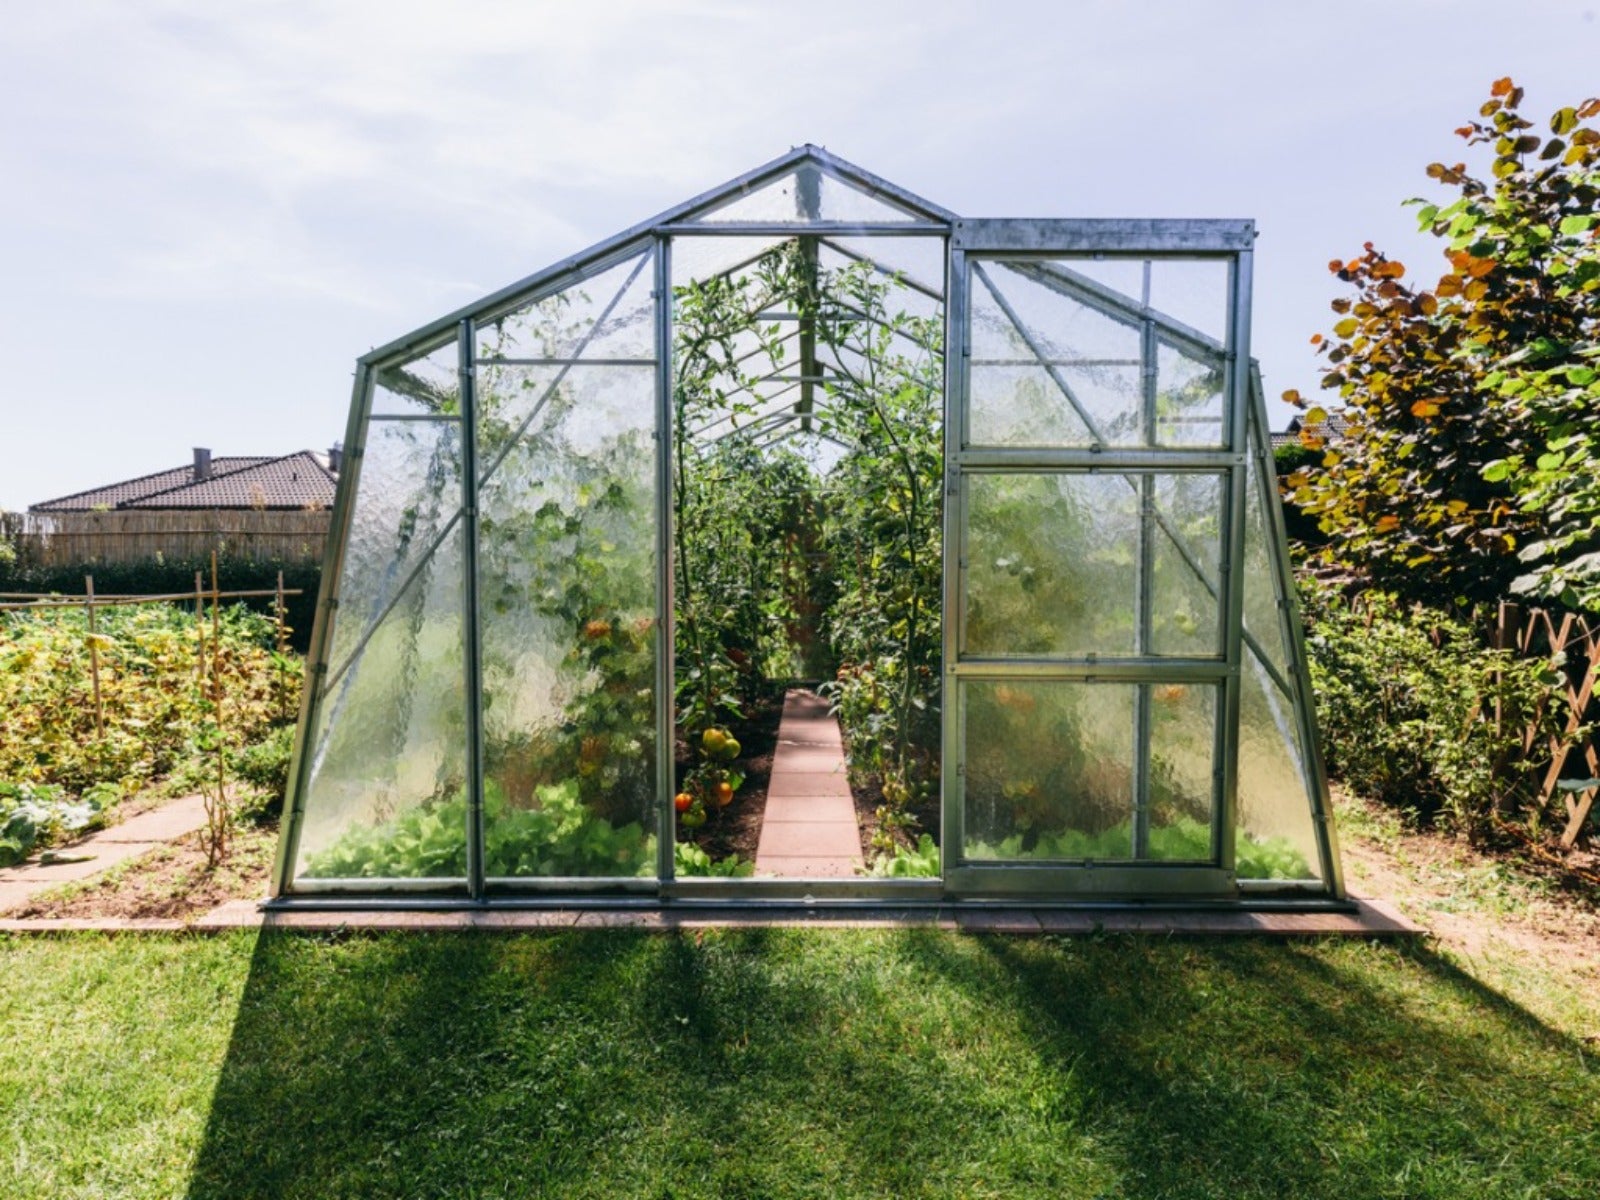 A glass greenhouse in a garden